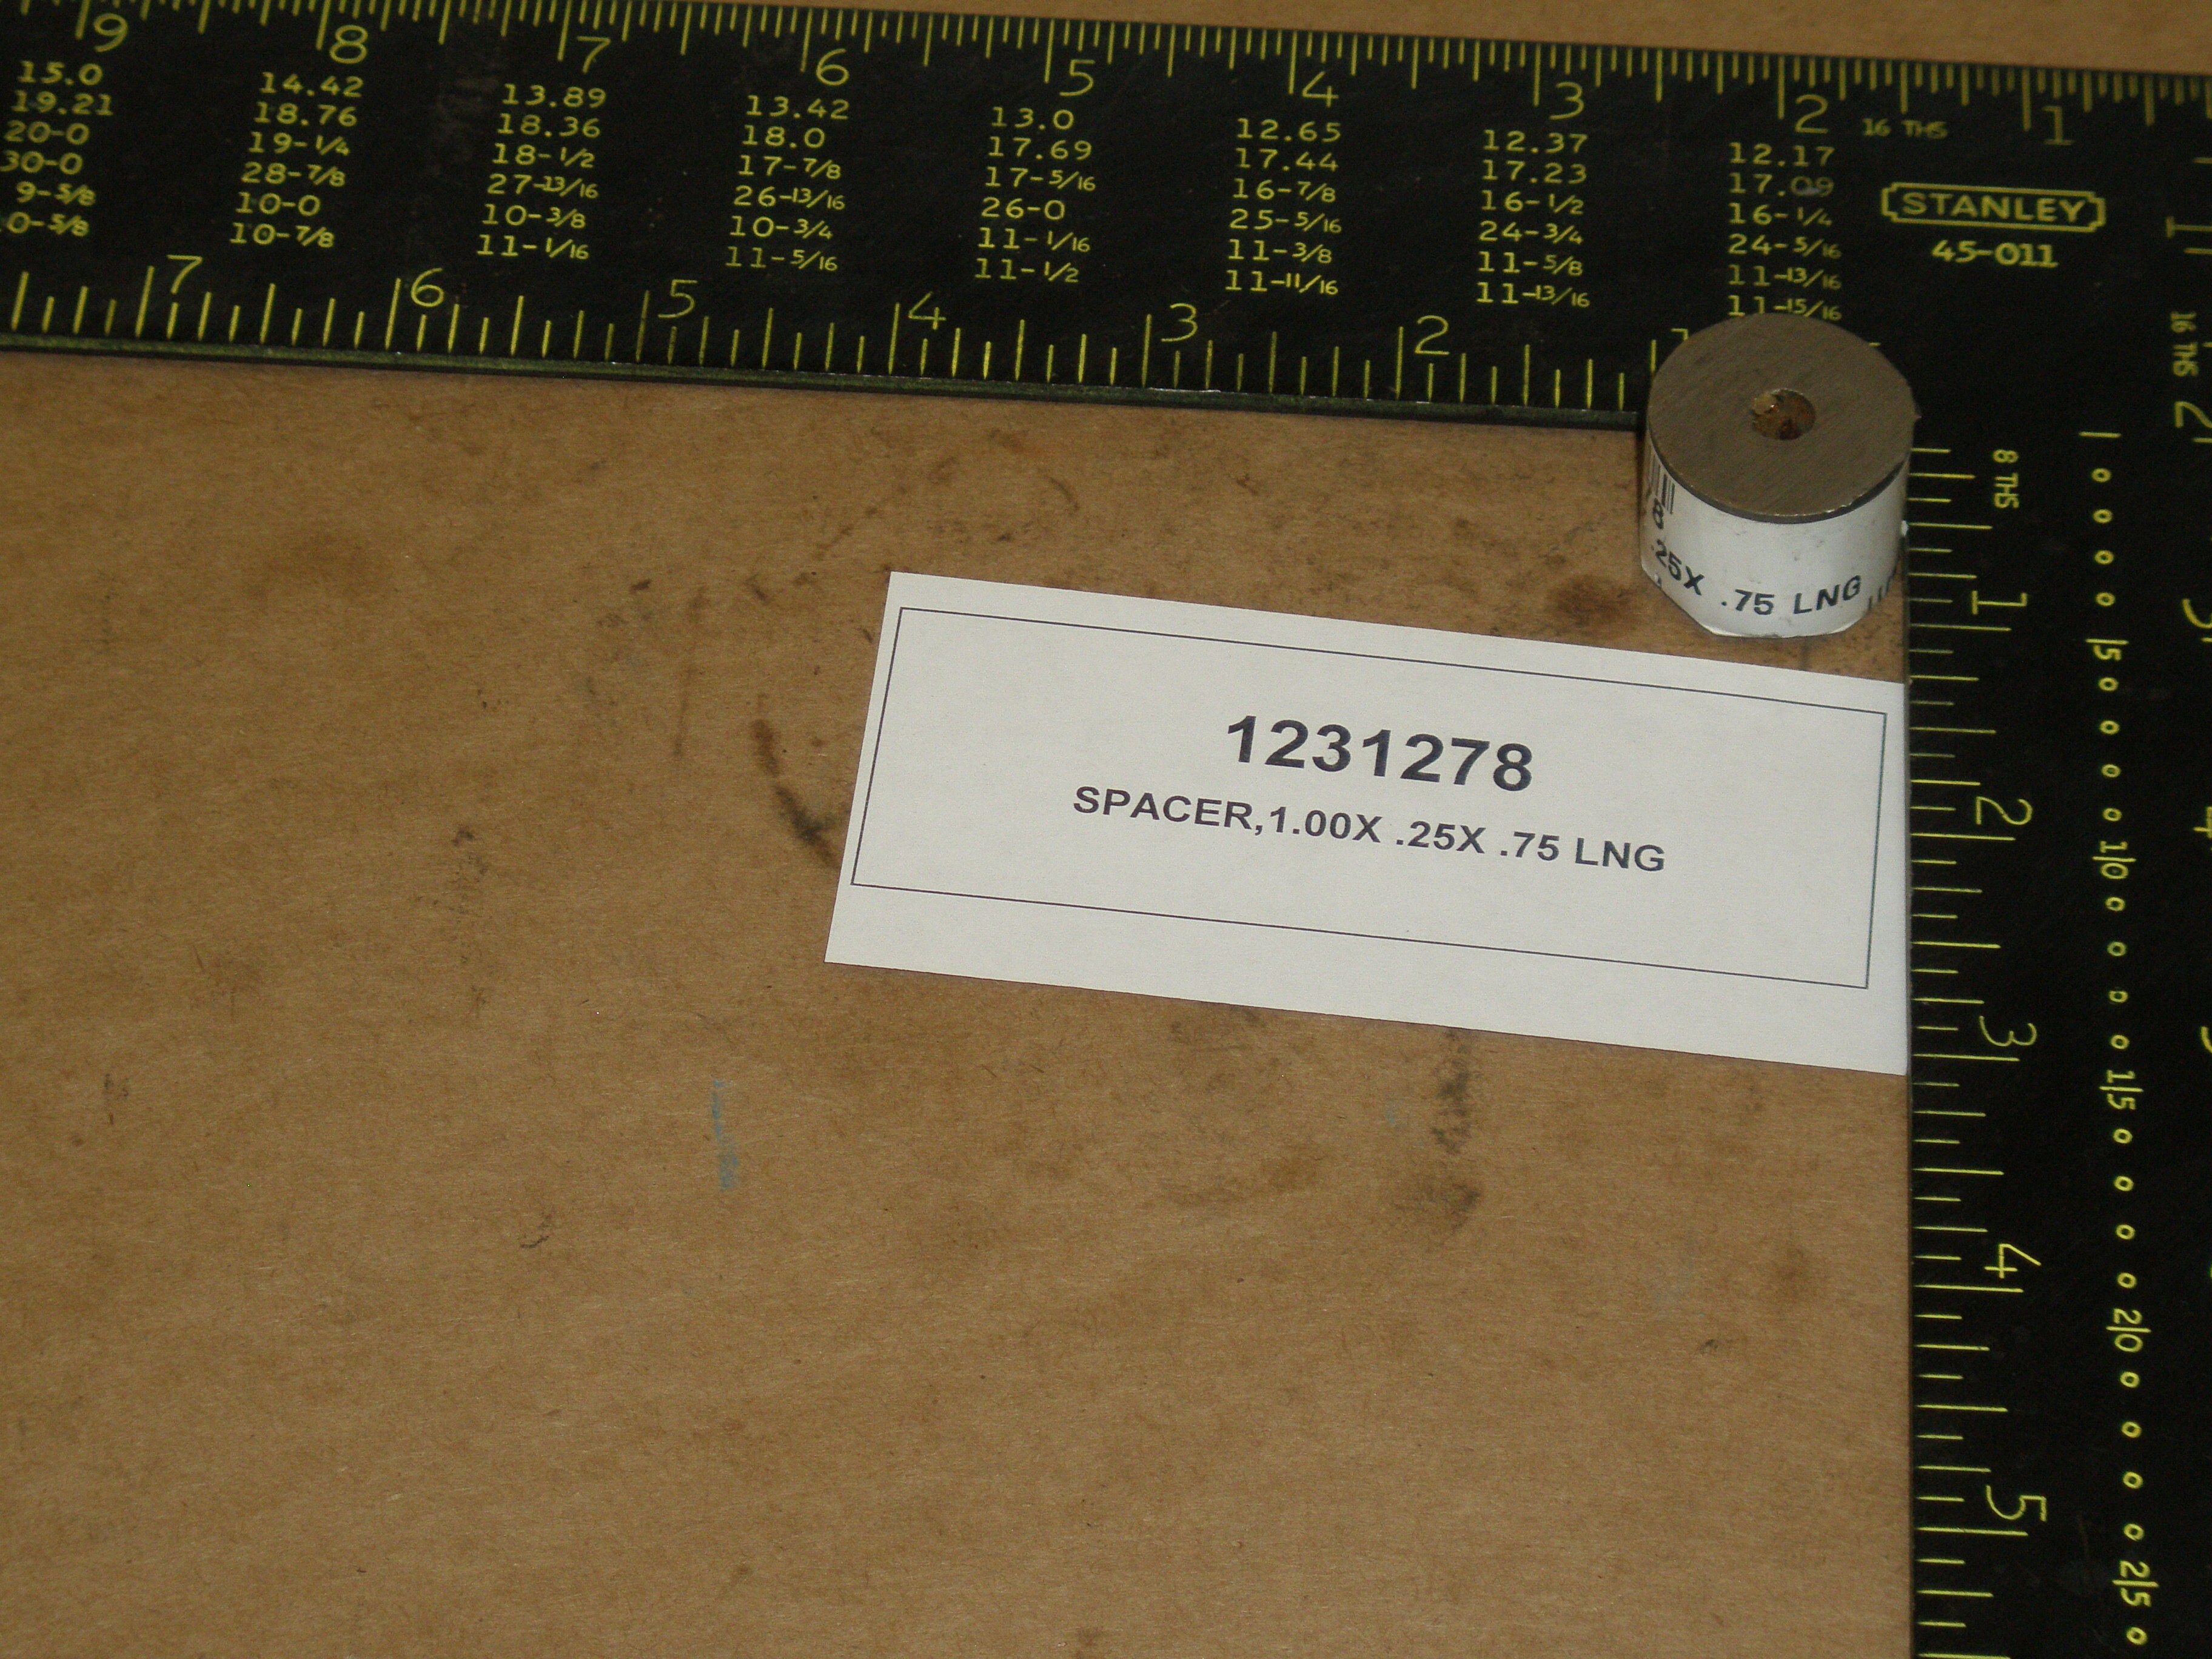 SPACER,1.00X .25X .75 LNG